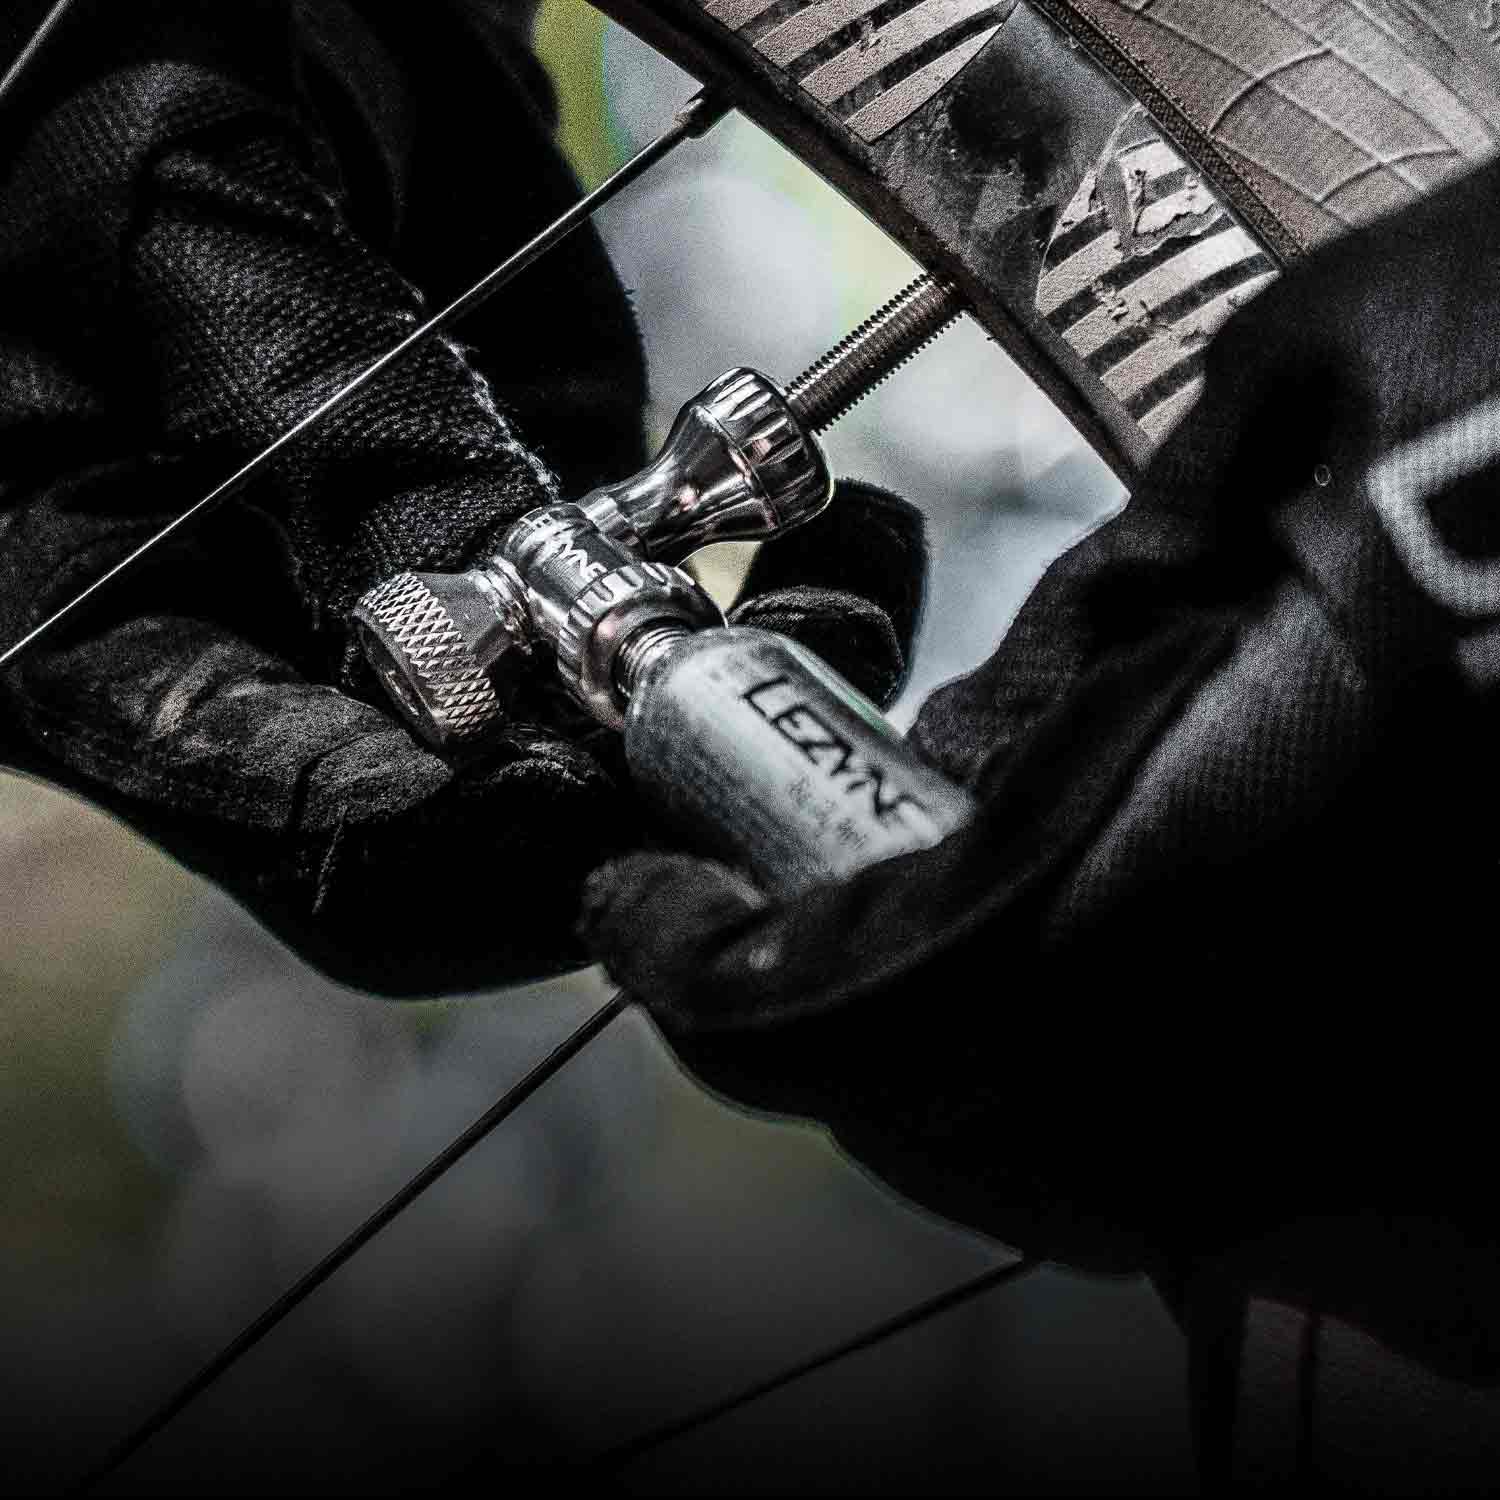 A closeup of gloved hands using a CO2 inflation canister to inflate a bicycle tire.